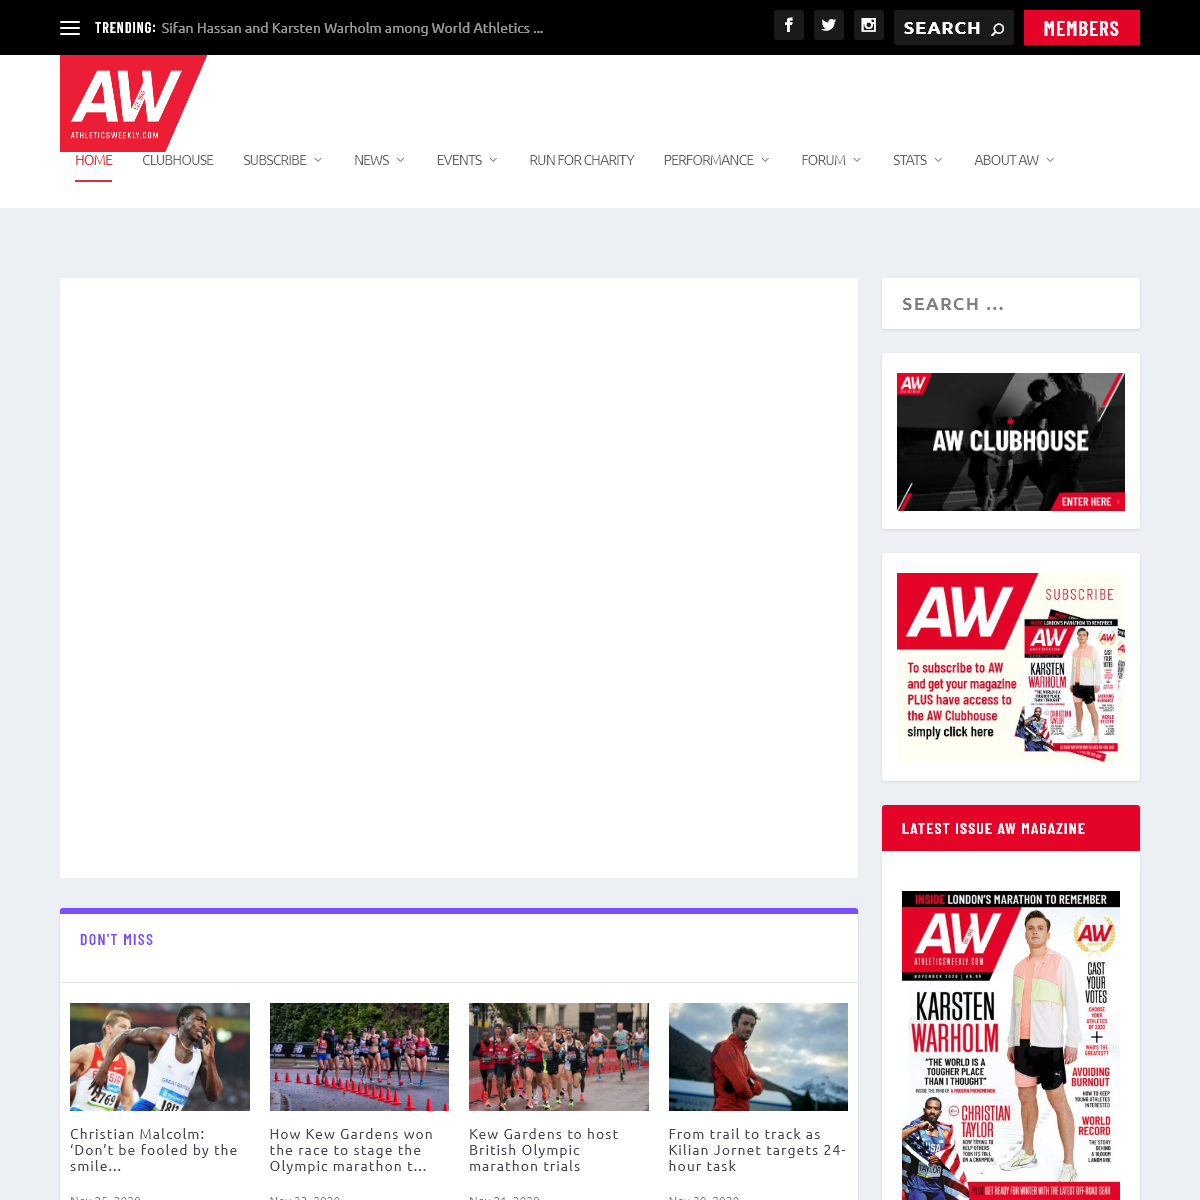 A complete backup of athleticsweekly.com